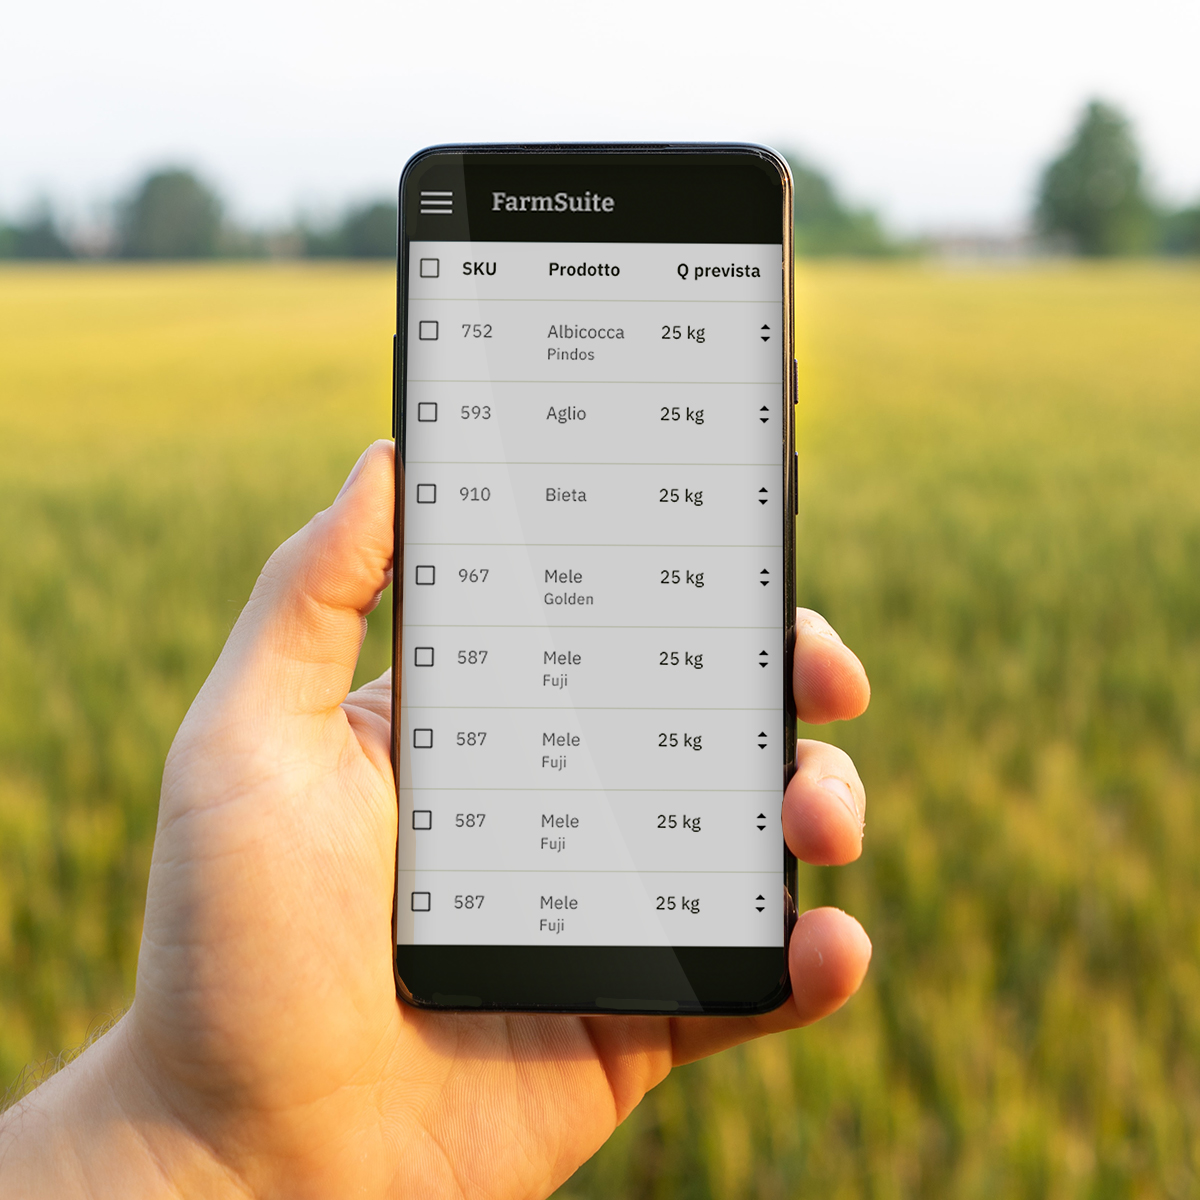 FarmSuite - a platform co-created with farmers to answer their needs